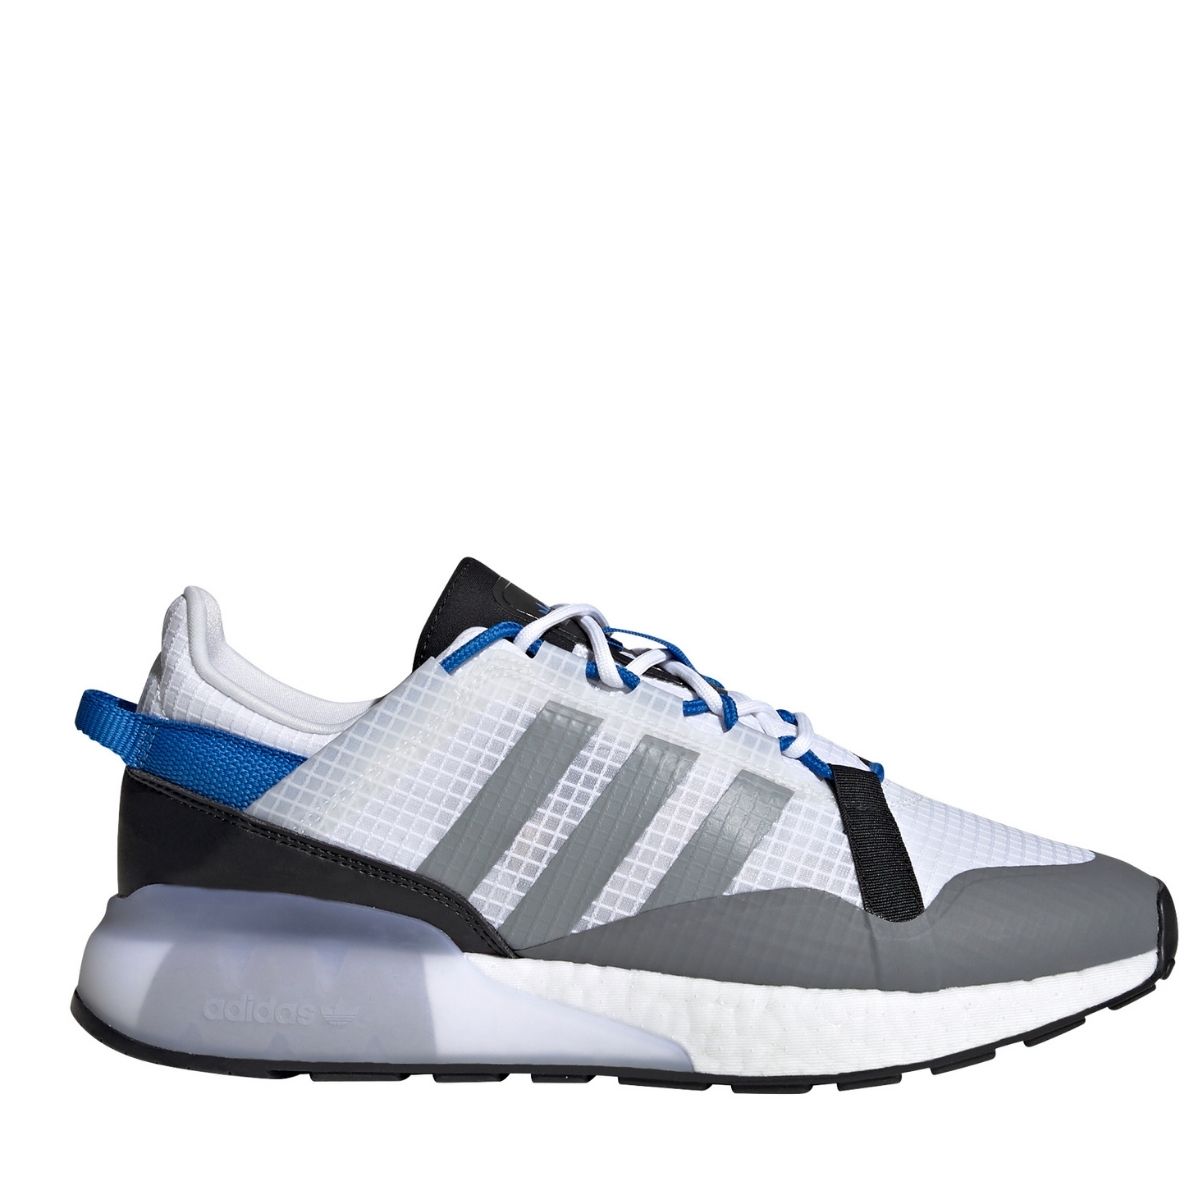 adidas ZX Series | Buy adidas Sneakers Online | Hype DC